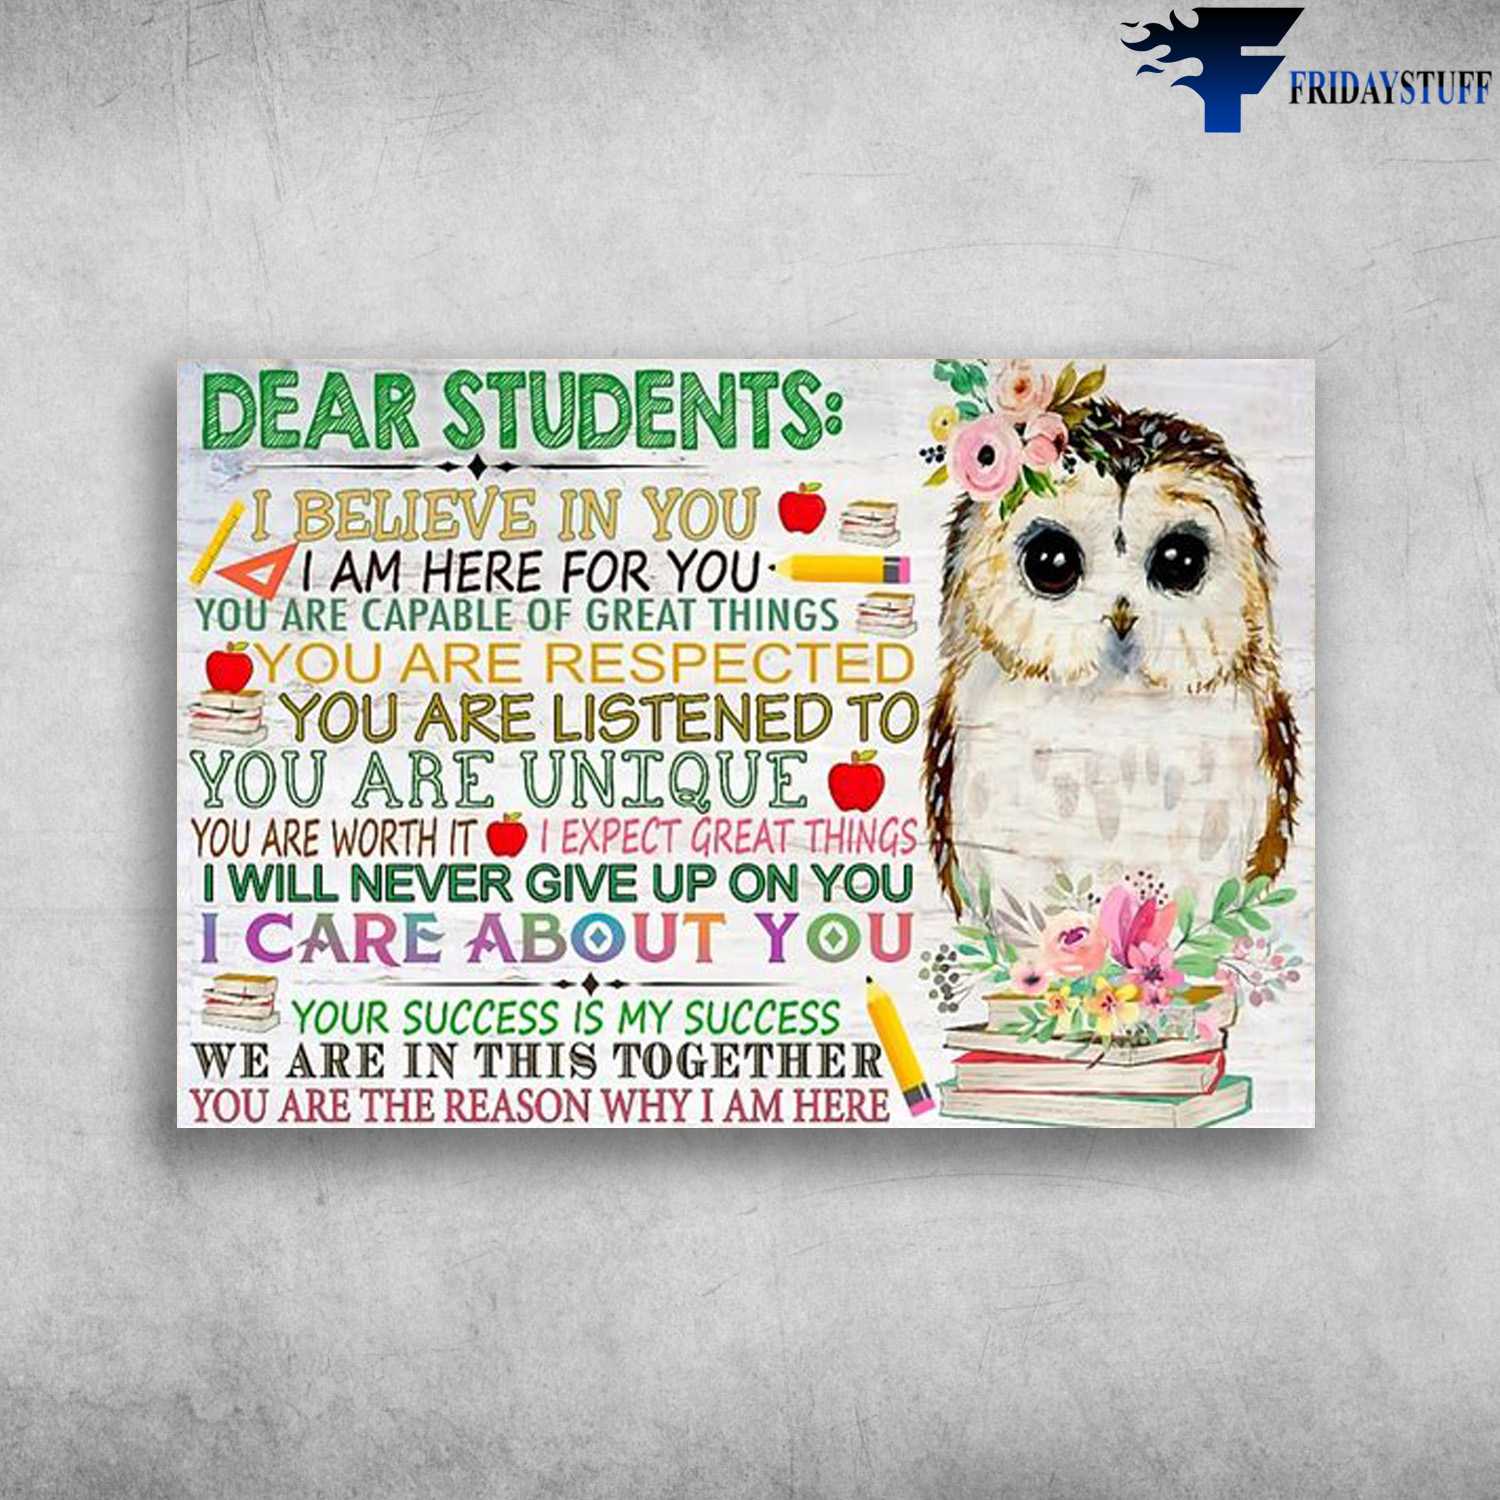 Owl Class, Classroom Decor, I Believe In You, I Am Here For You, You Are Capable Of Great Things, You Are Respected, You Are Listened To